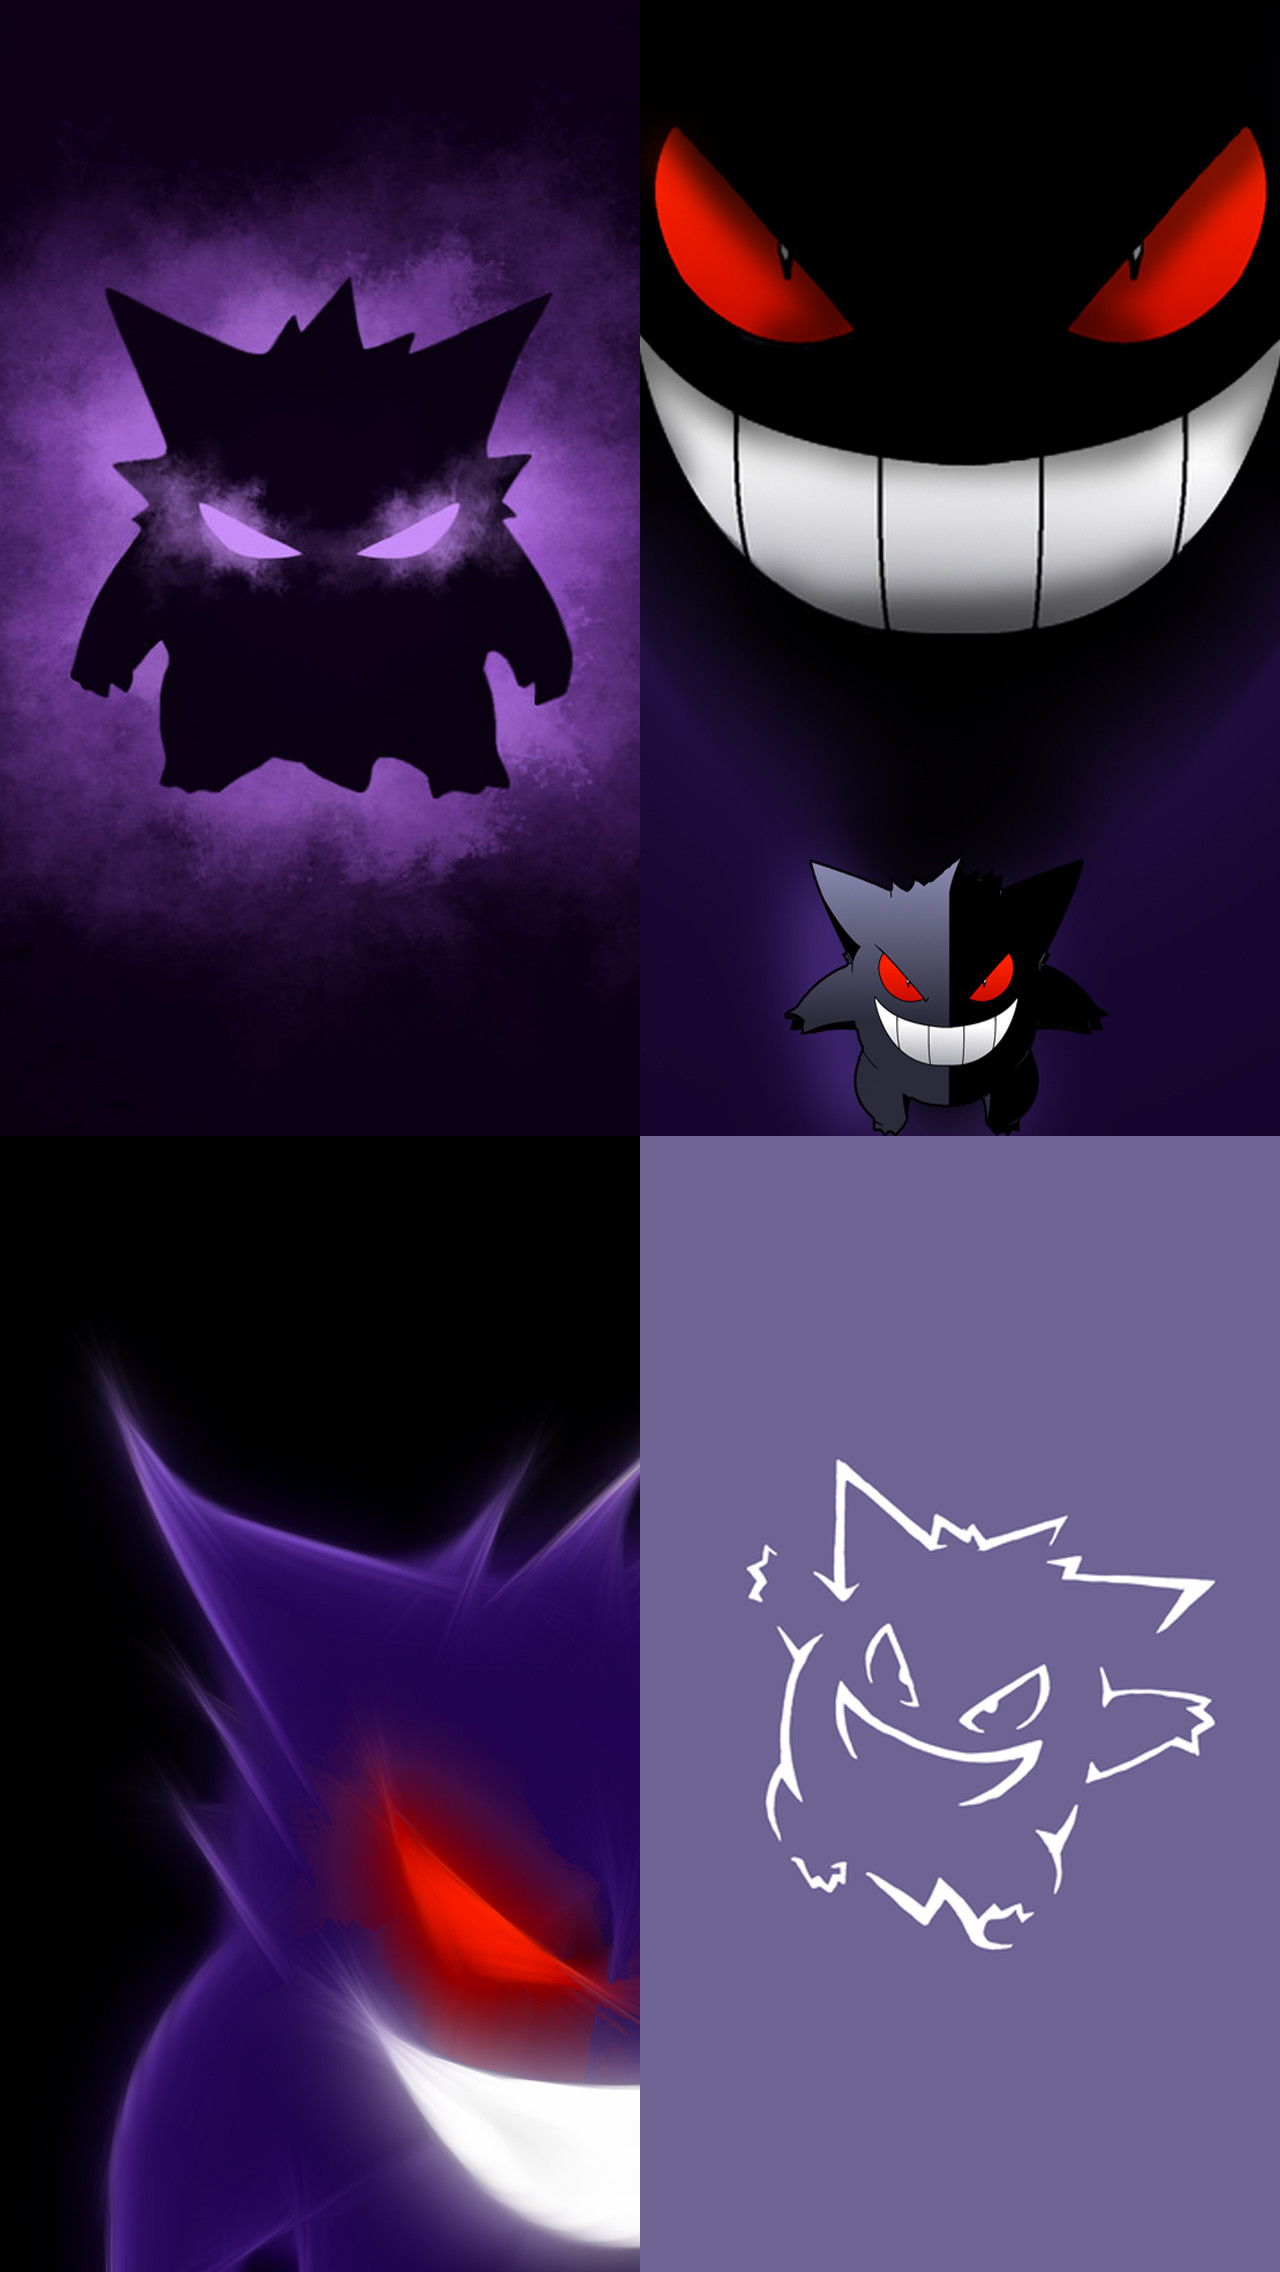 Pokemon Gengar IPhone 5 wallpapers by Acester8